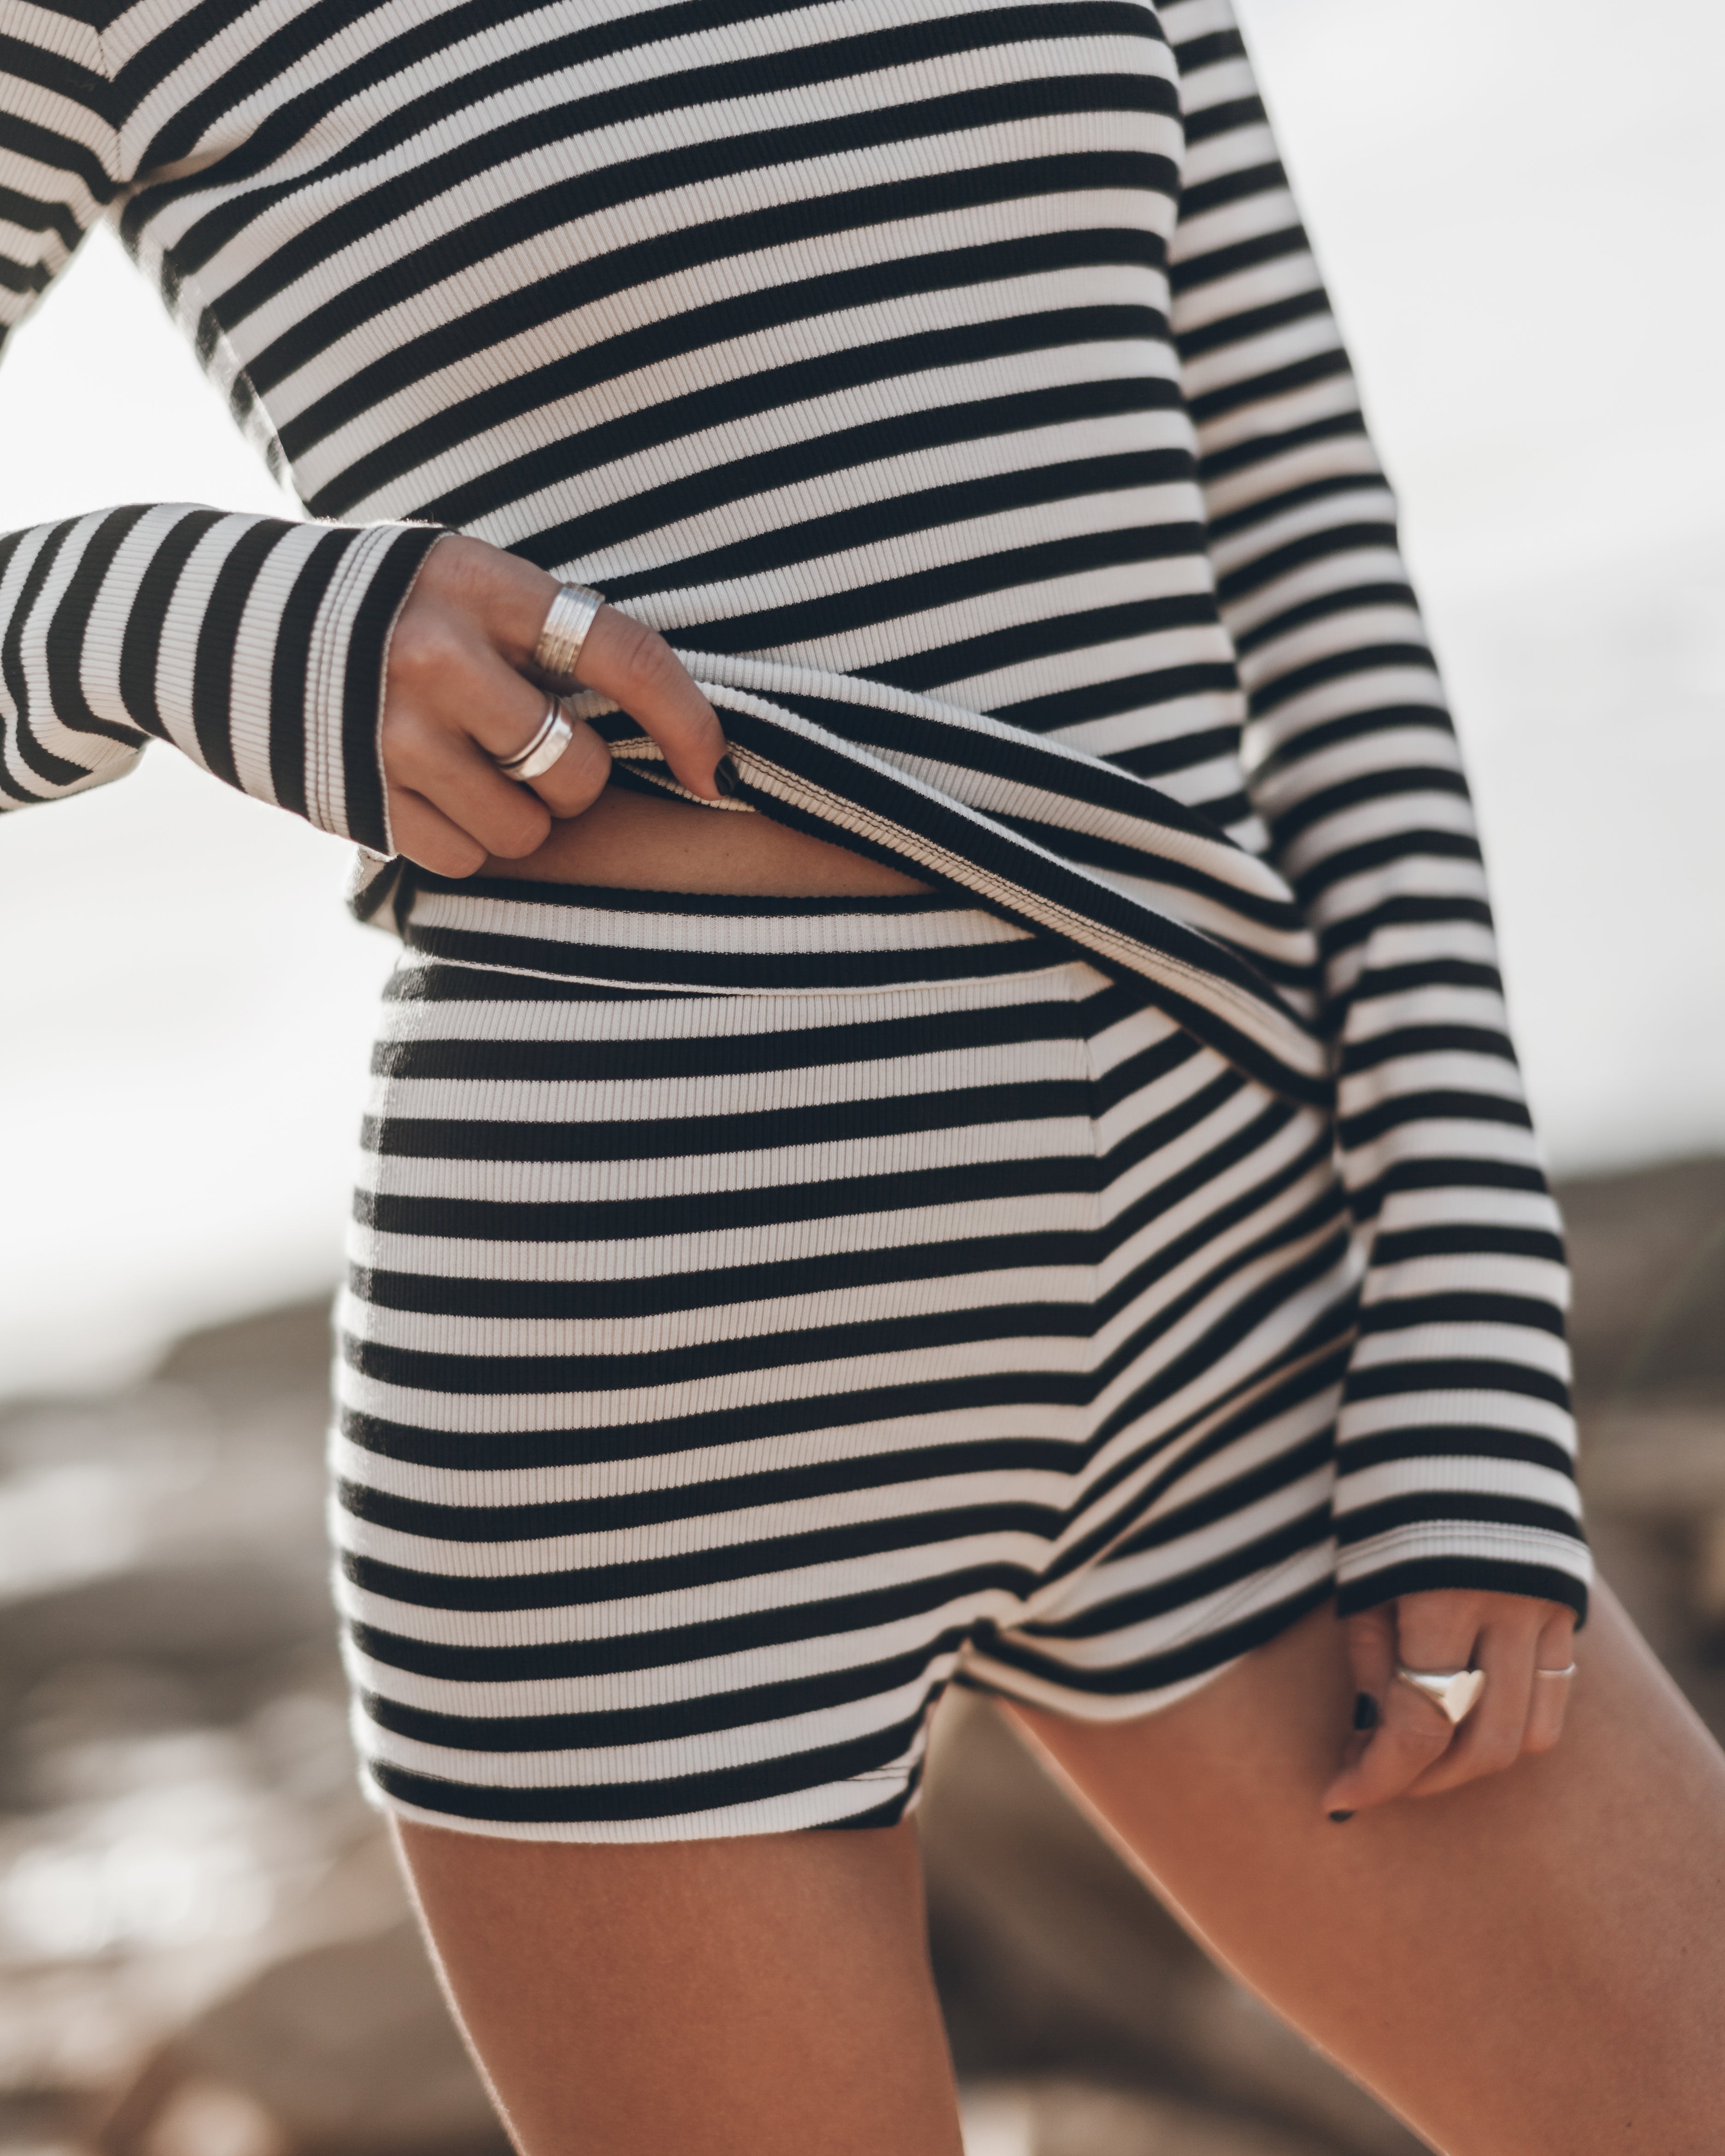 The Striped Ribbed Shorts